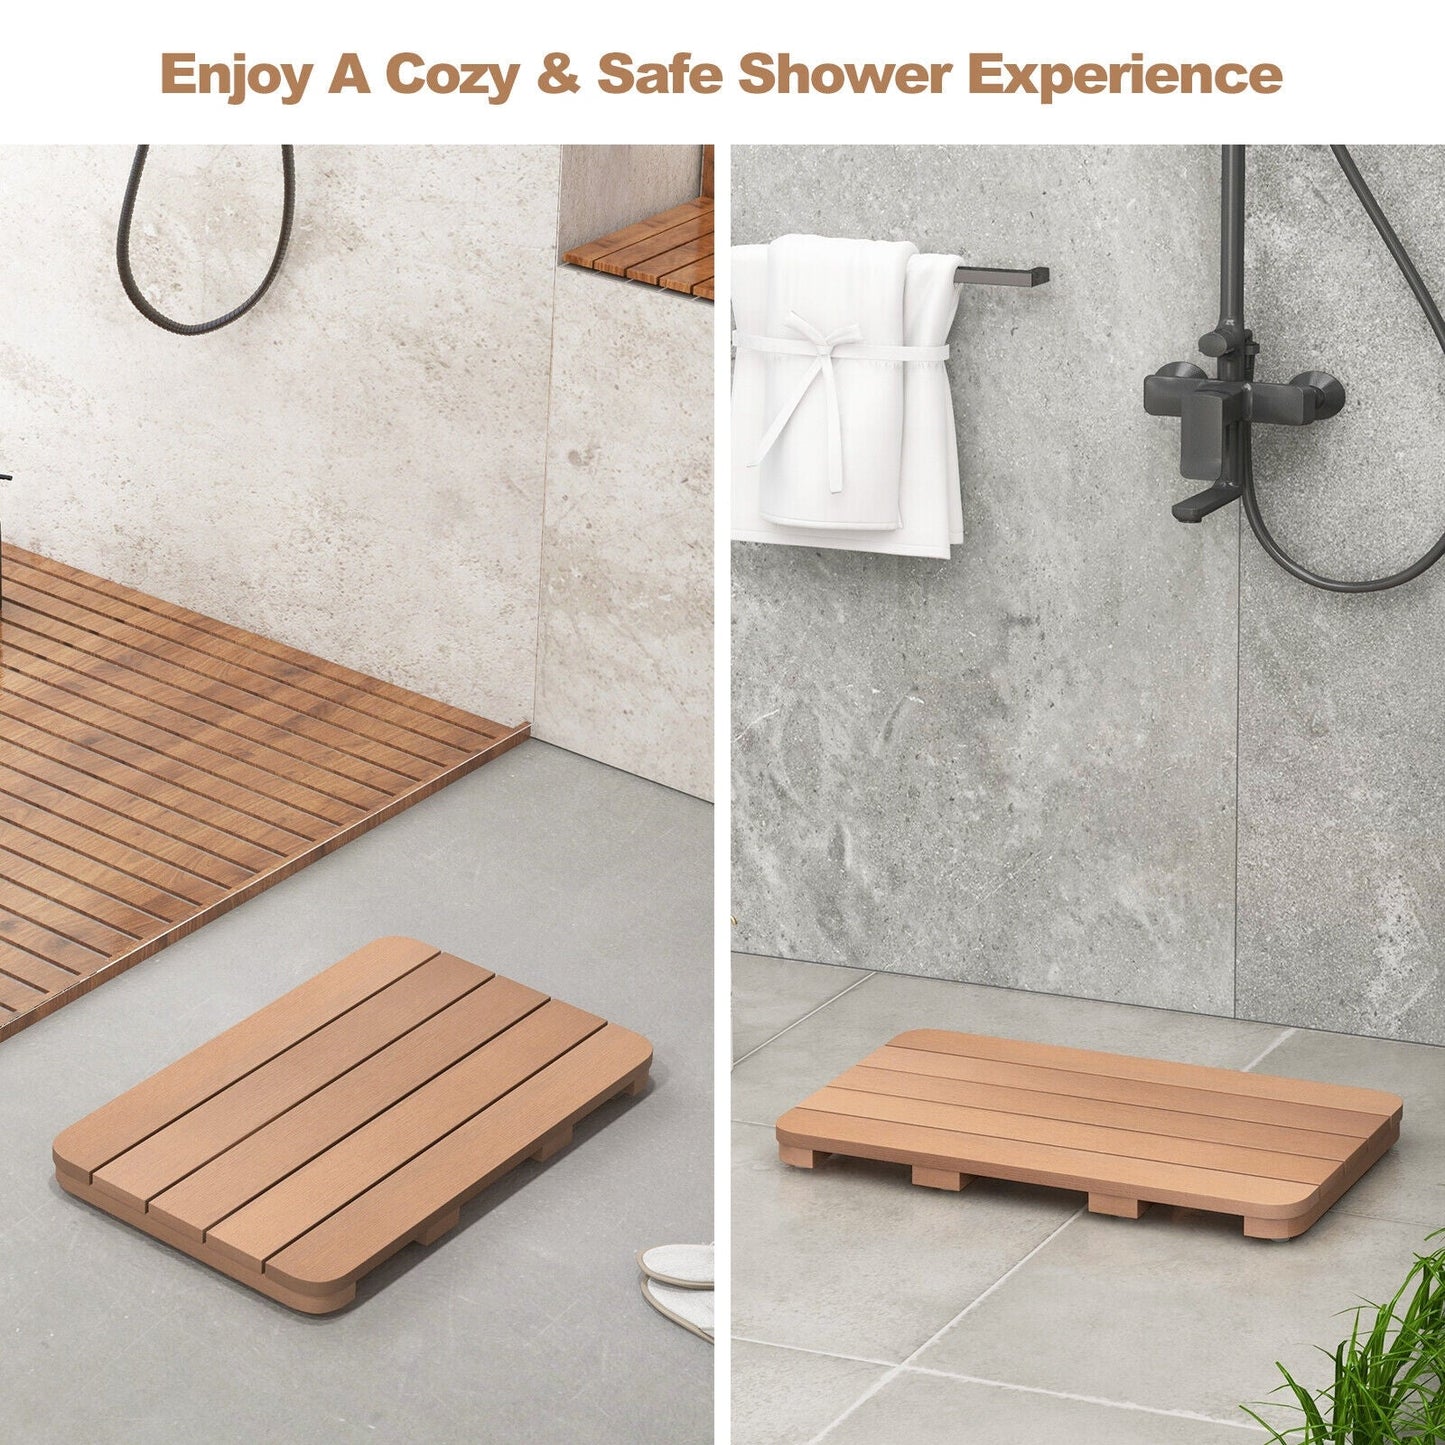 Waterproof HIPS Spa Shower Mat for Bathroom with Non Slip Foot Pads - Gallery Canada